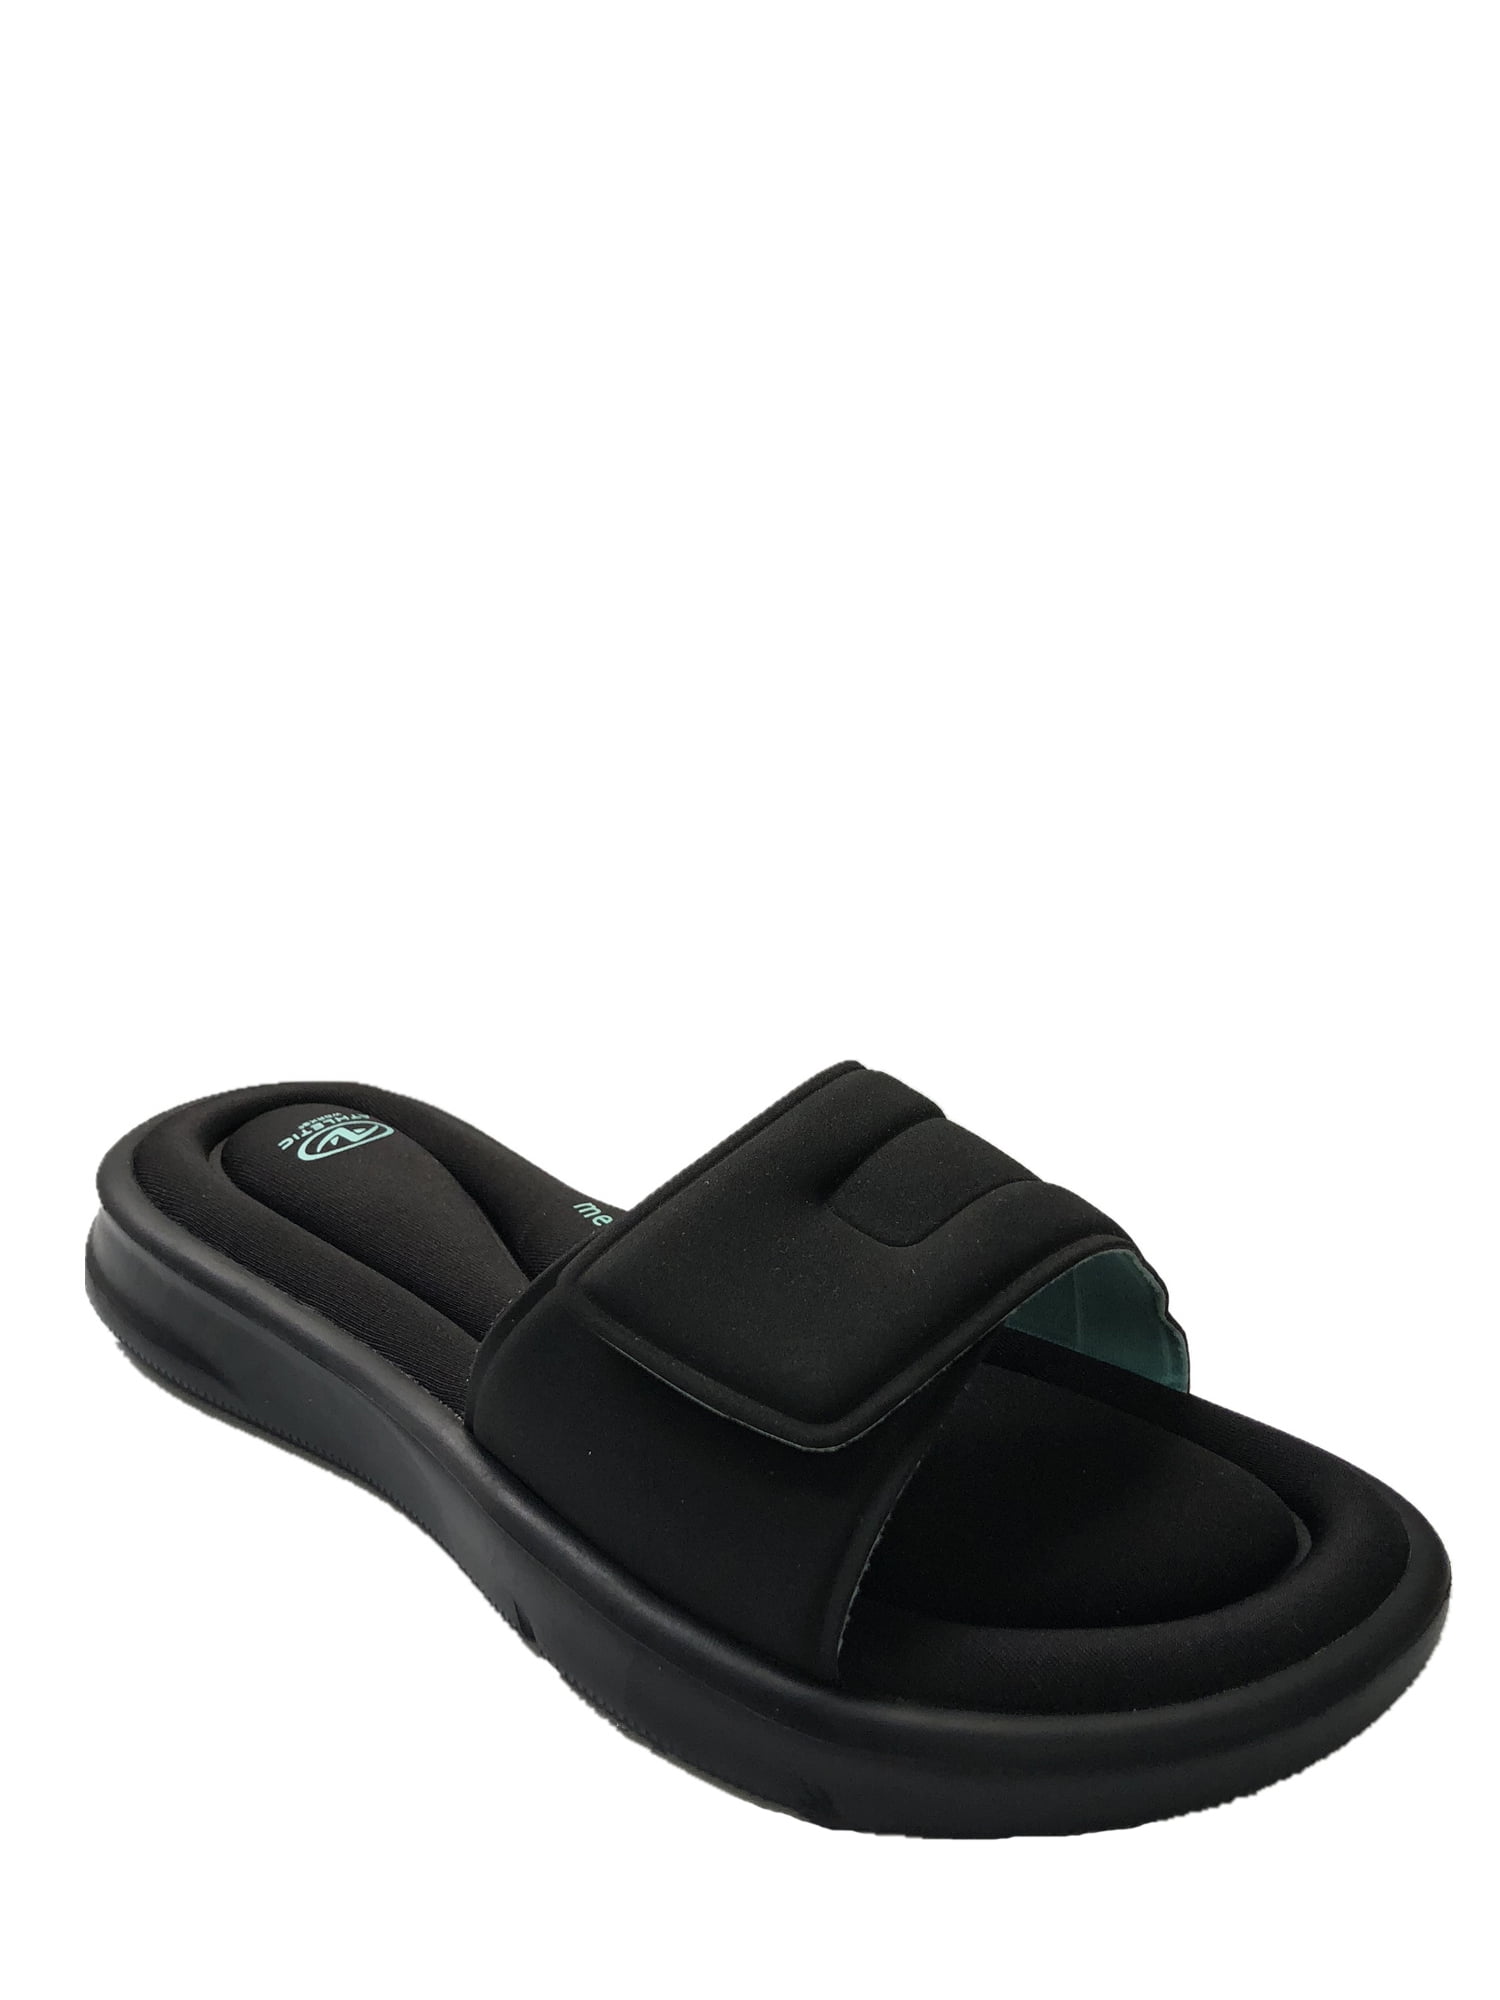 wide width athletic sandals